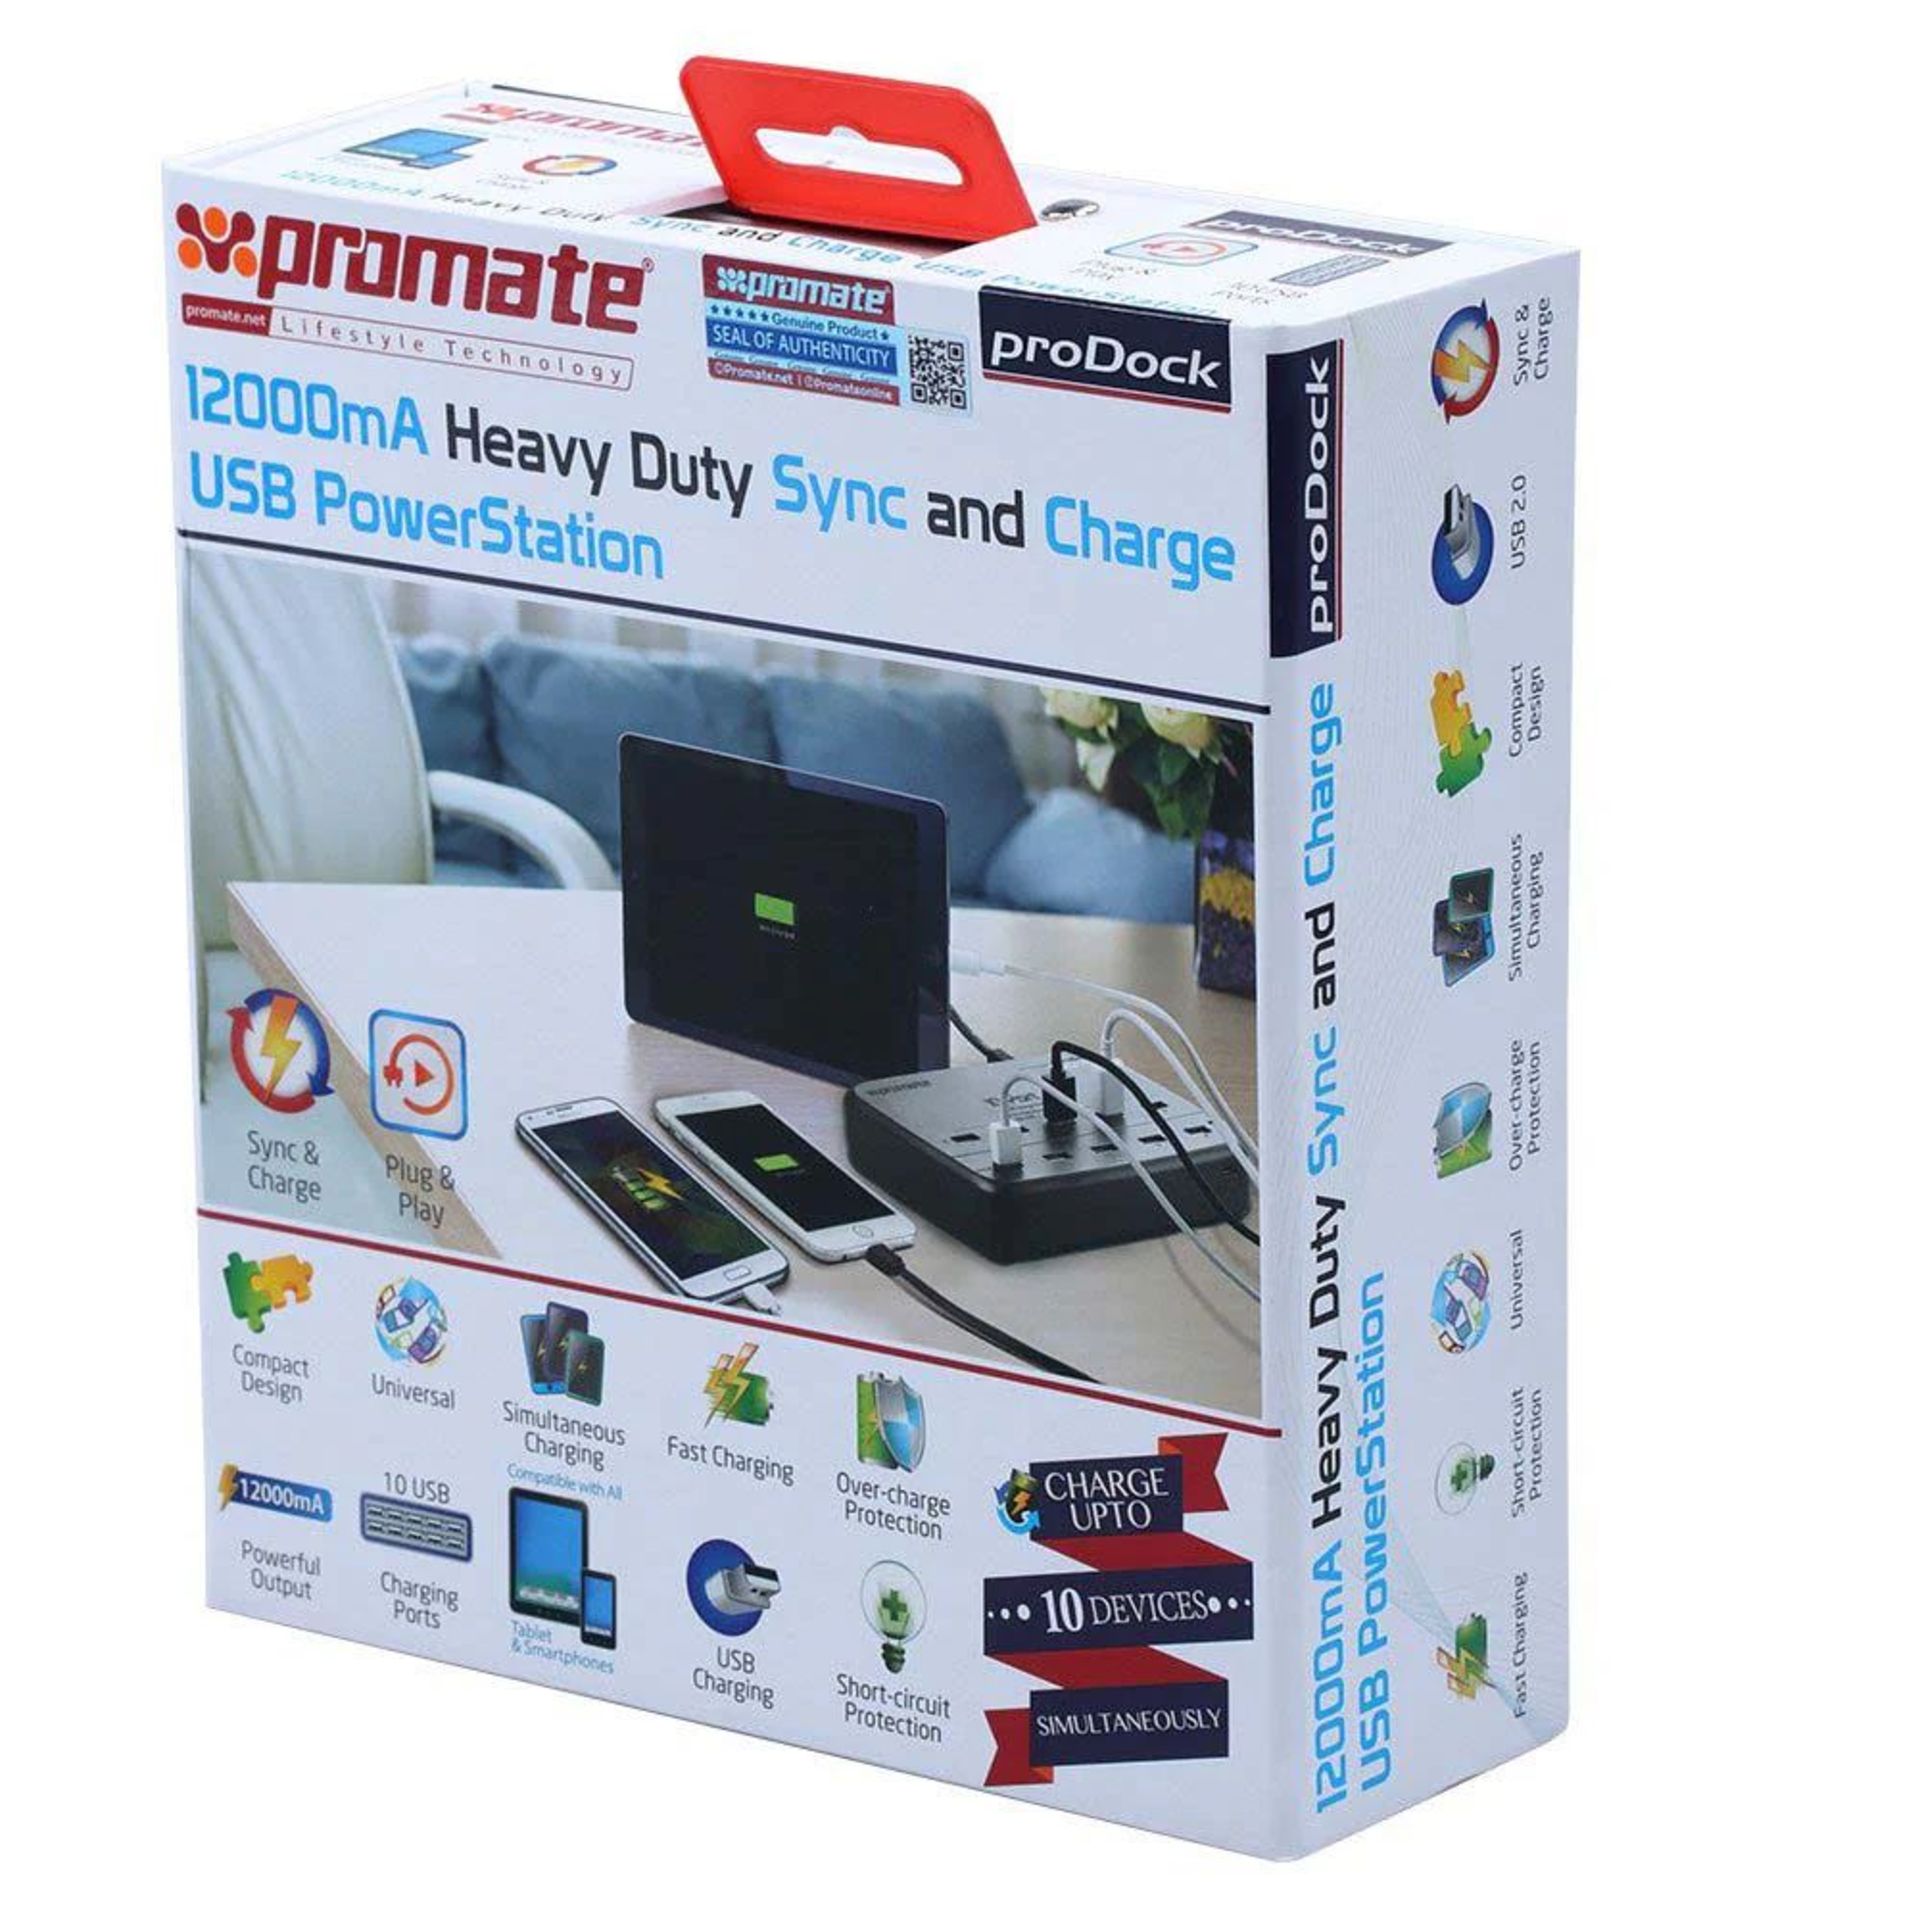 5x BRAND NEW FACTORY SEALED PROMATE ProDock 12000mA Heavy Duty Sync and Charge USB PowerStation. RRP